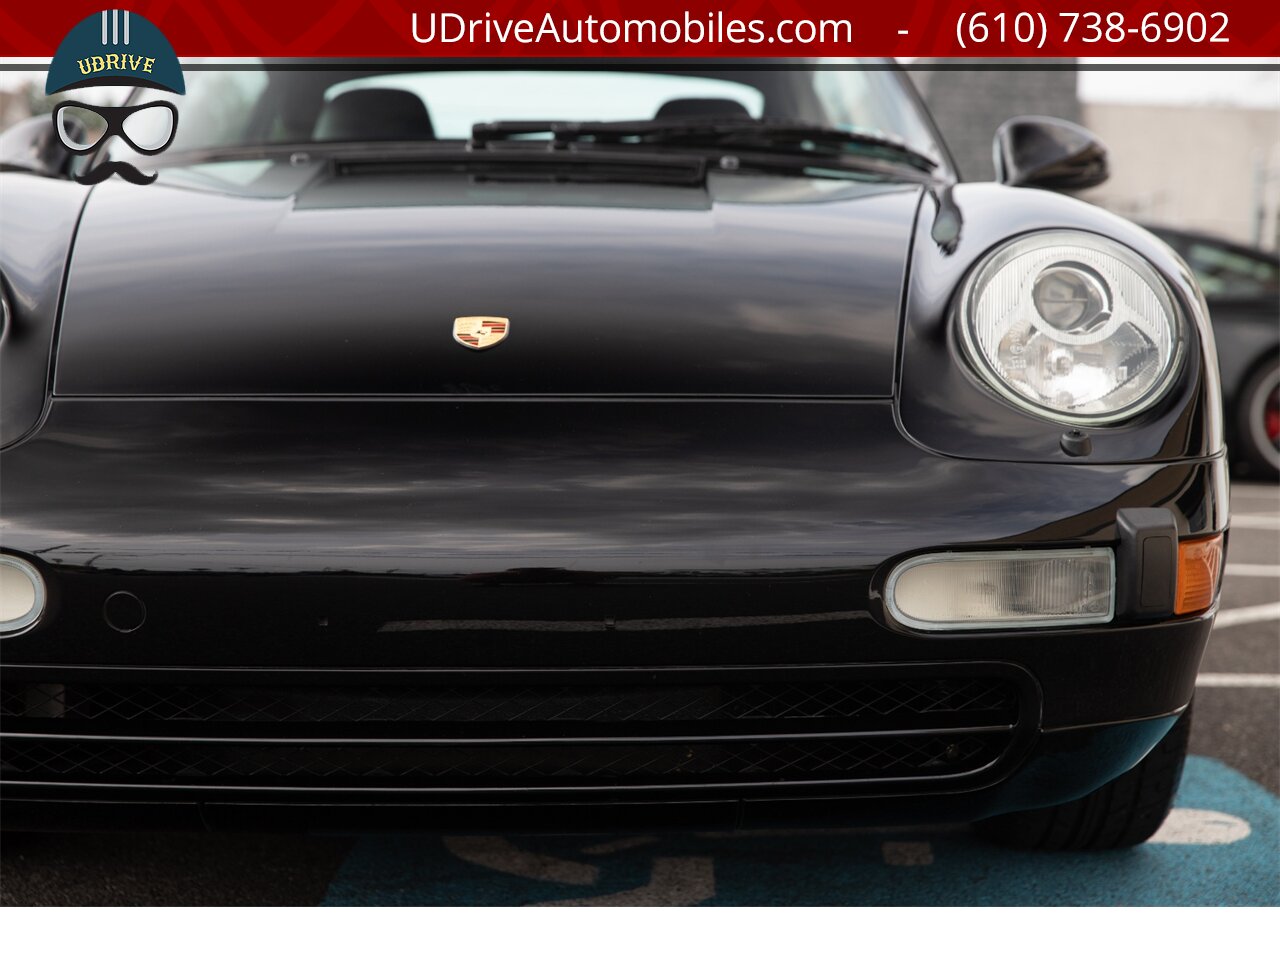 1995 Porsche 911 993 Carrera 6 Speed 16k Miles Service History  Black over Black Spectacular Stock Example 1 Owner Clean Carfax - Photo 10 - West Chester, PA 19382